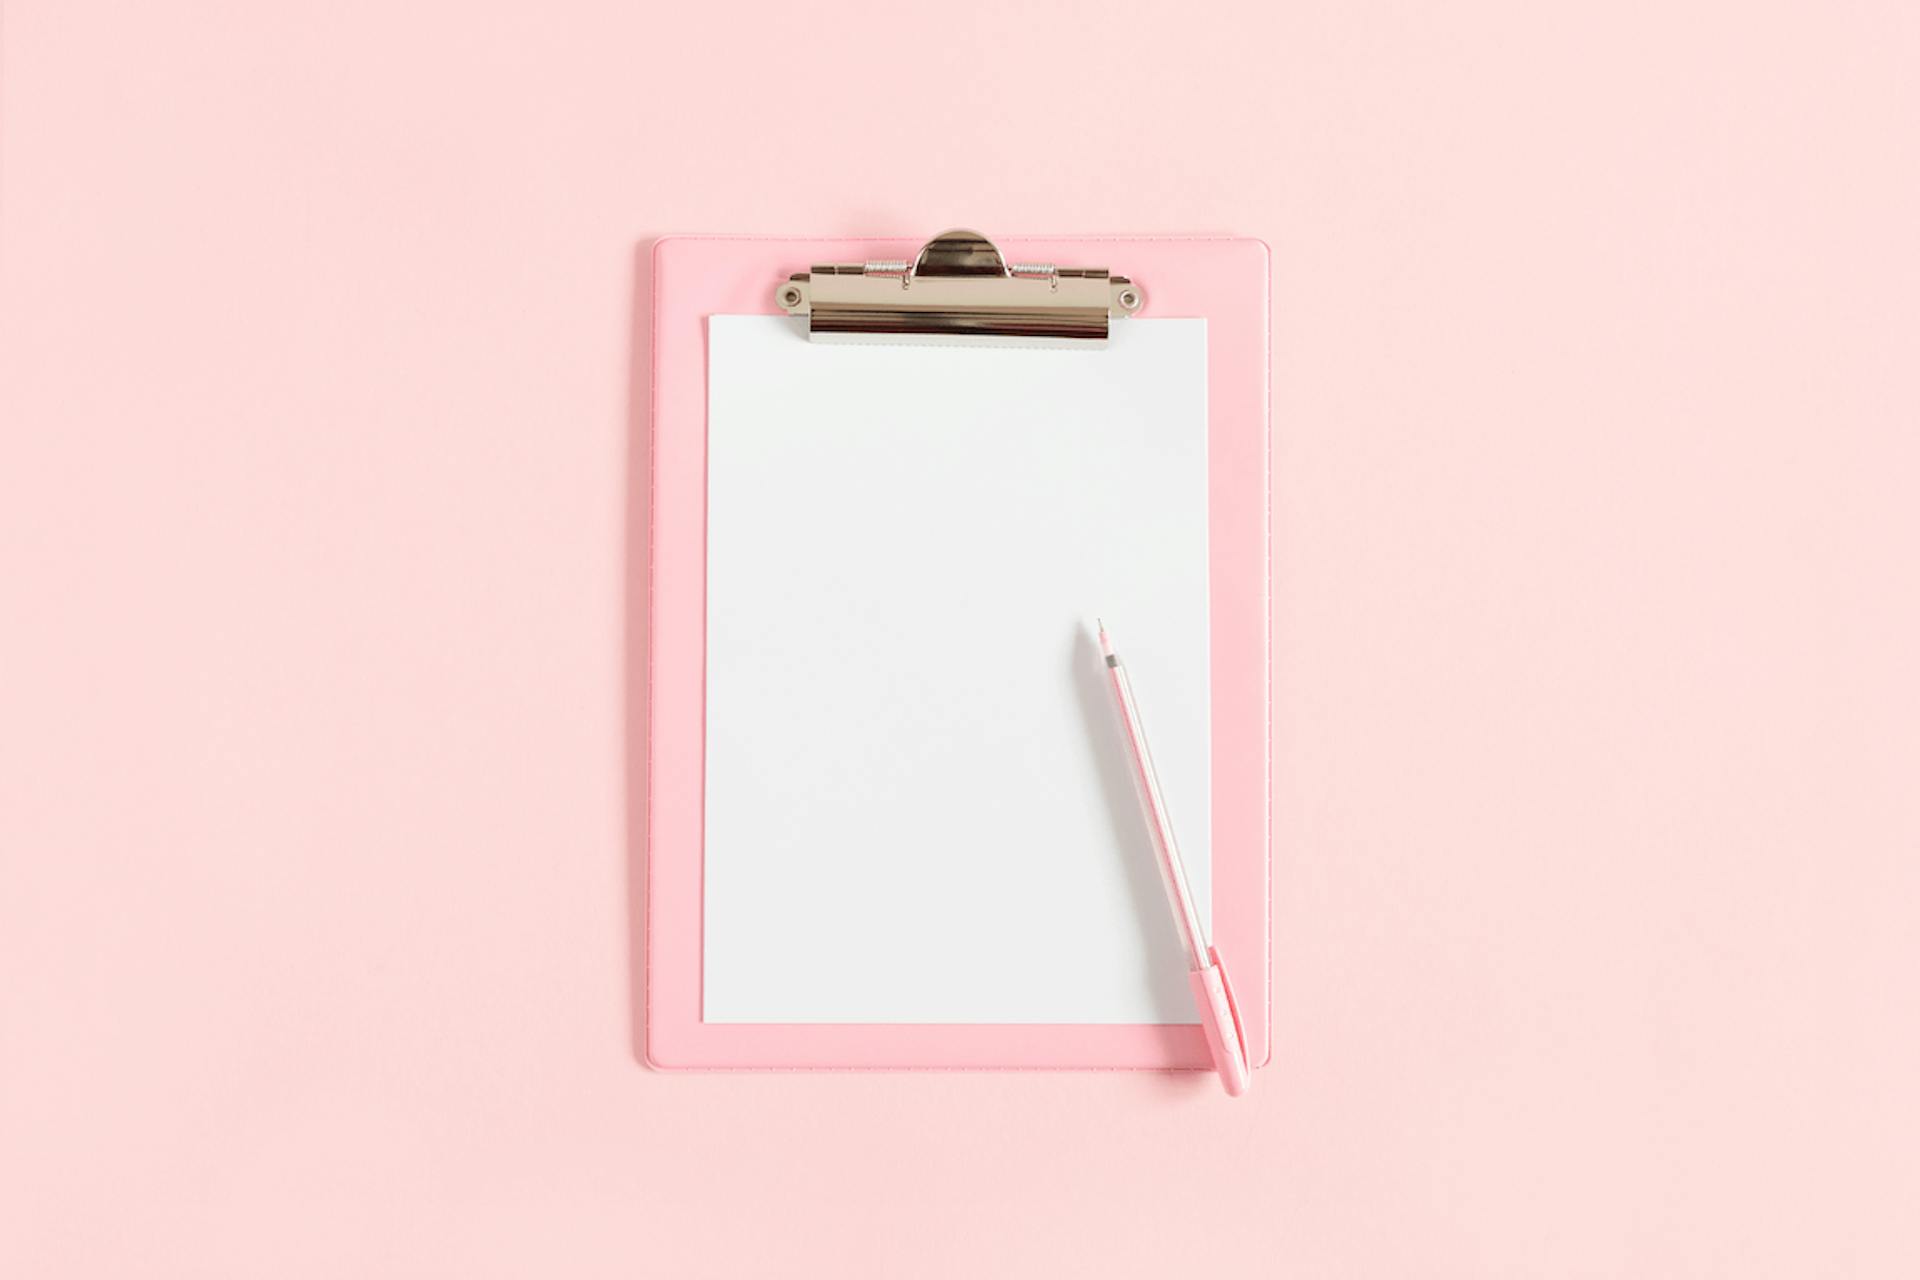 Clipboard with blank piece of paper and pen on light pink background. 10 examples of effective Press Releases.